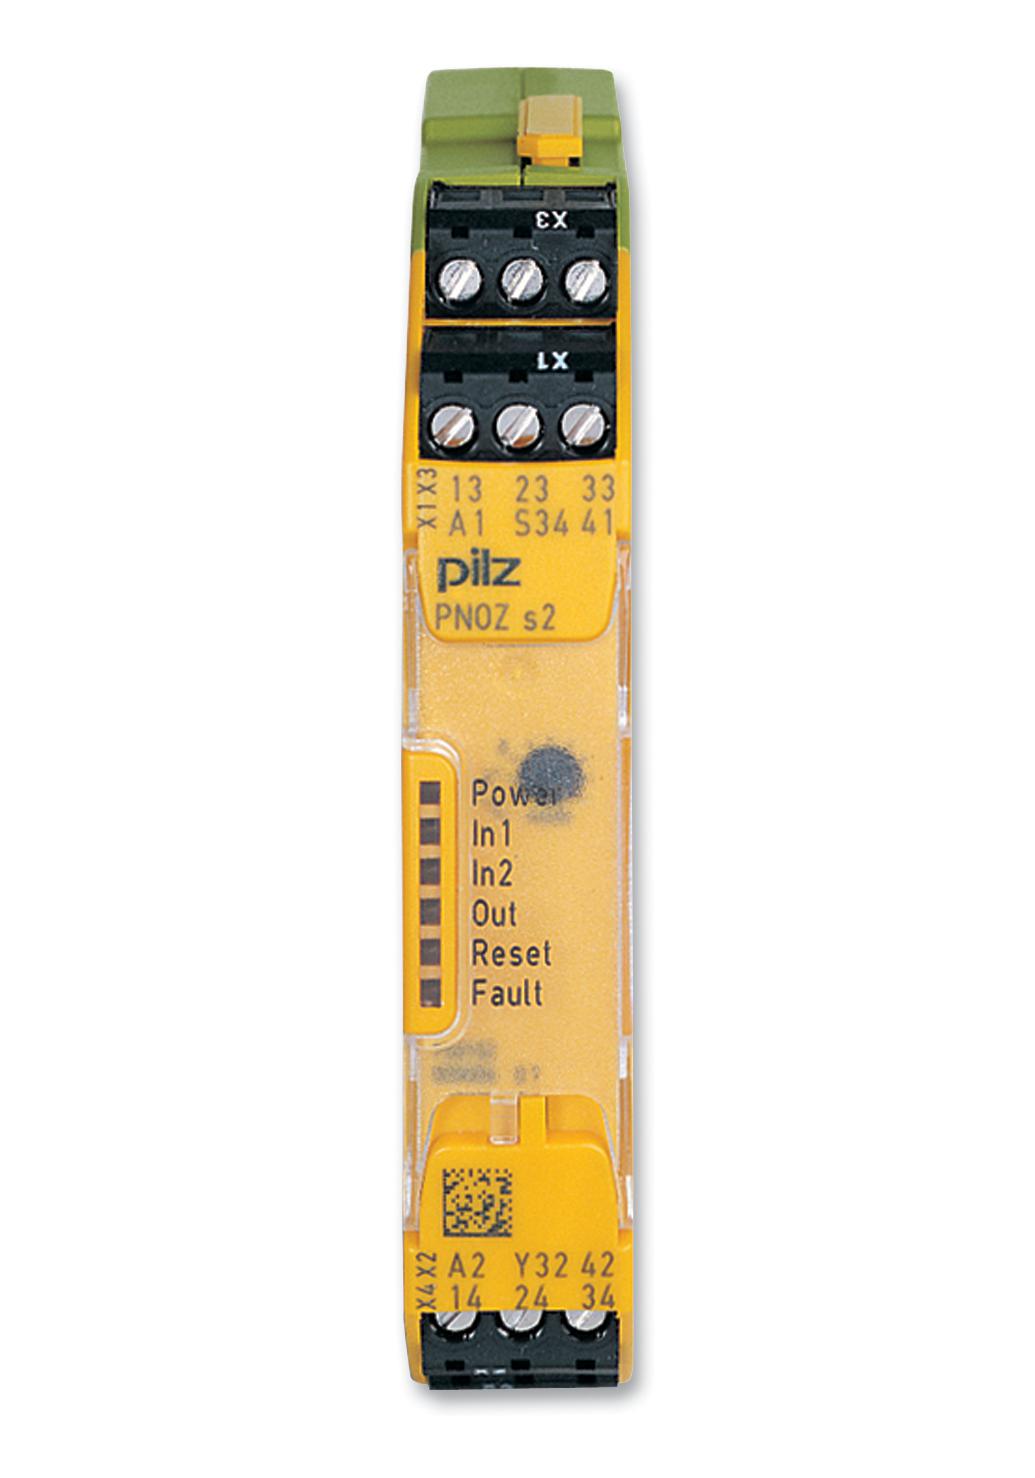 750102 RELAY, SAFETY, 3PST-NO, 240VAC, 6A PILZ